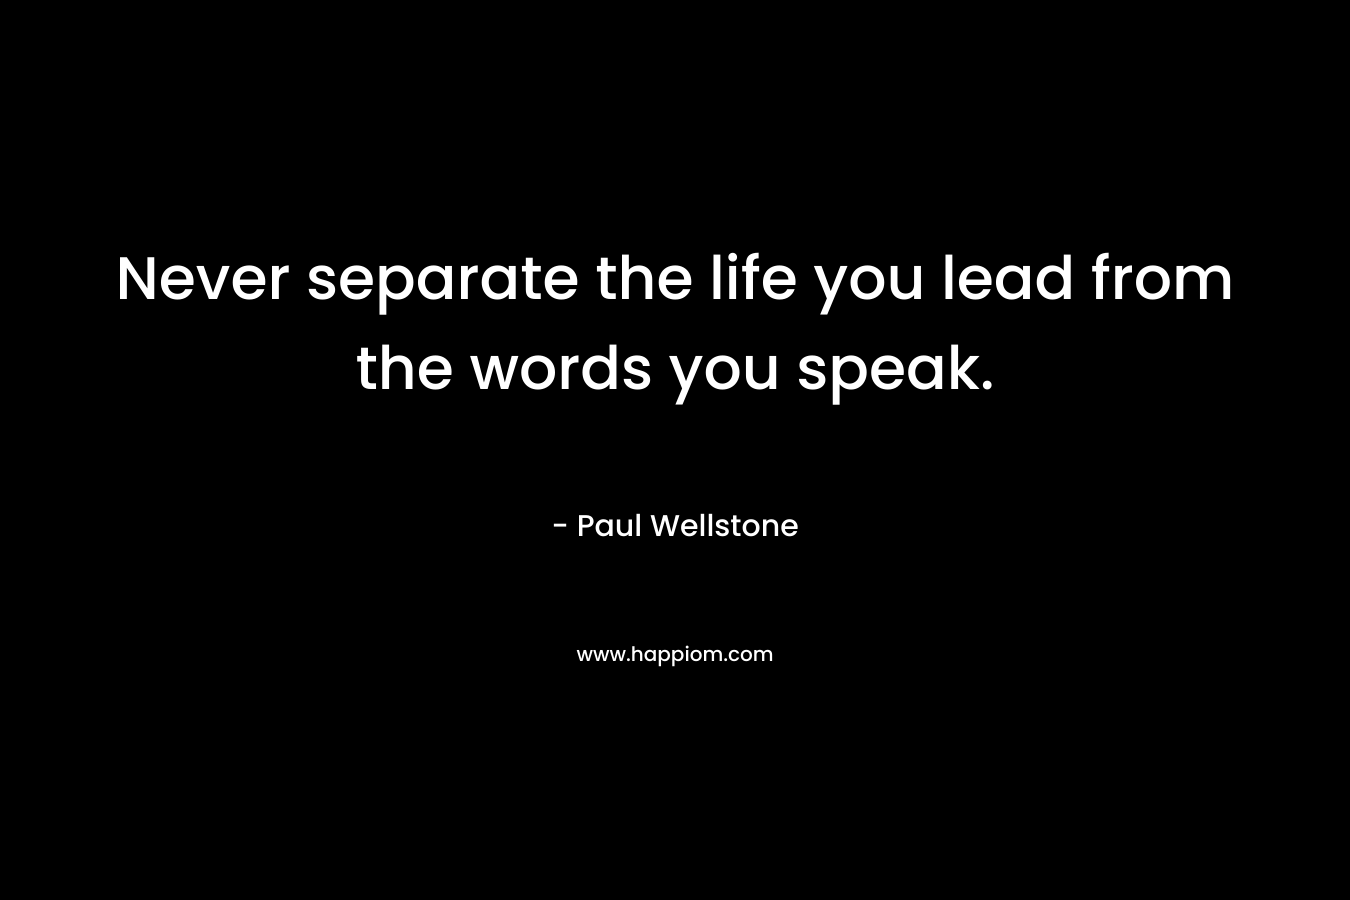 Never separate the life you lead from the words you speak. – Paul Wellstone